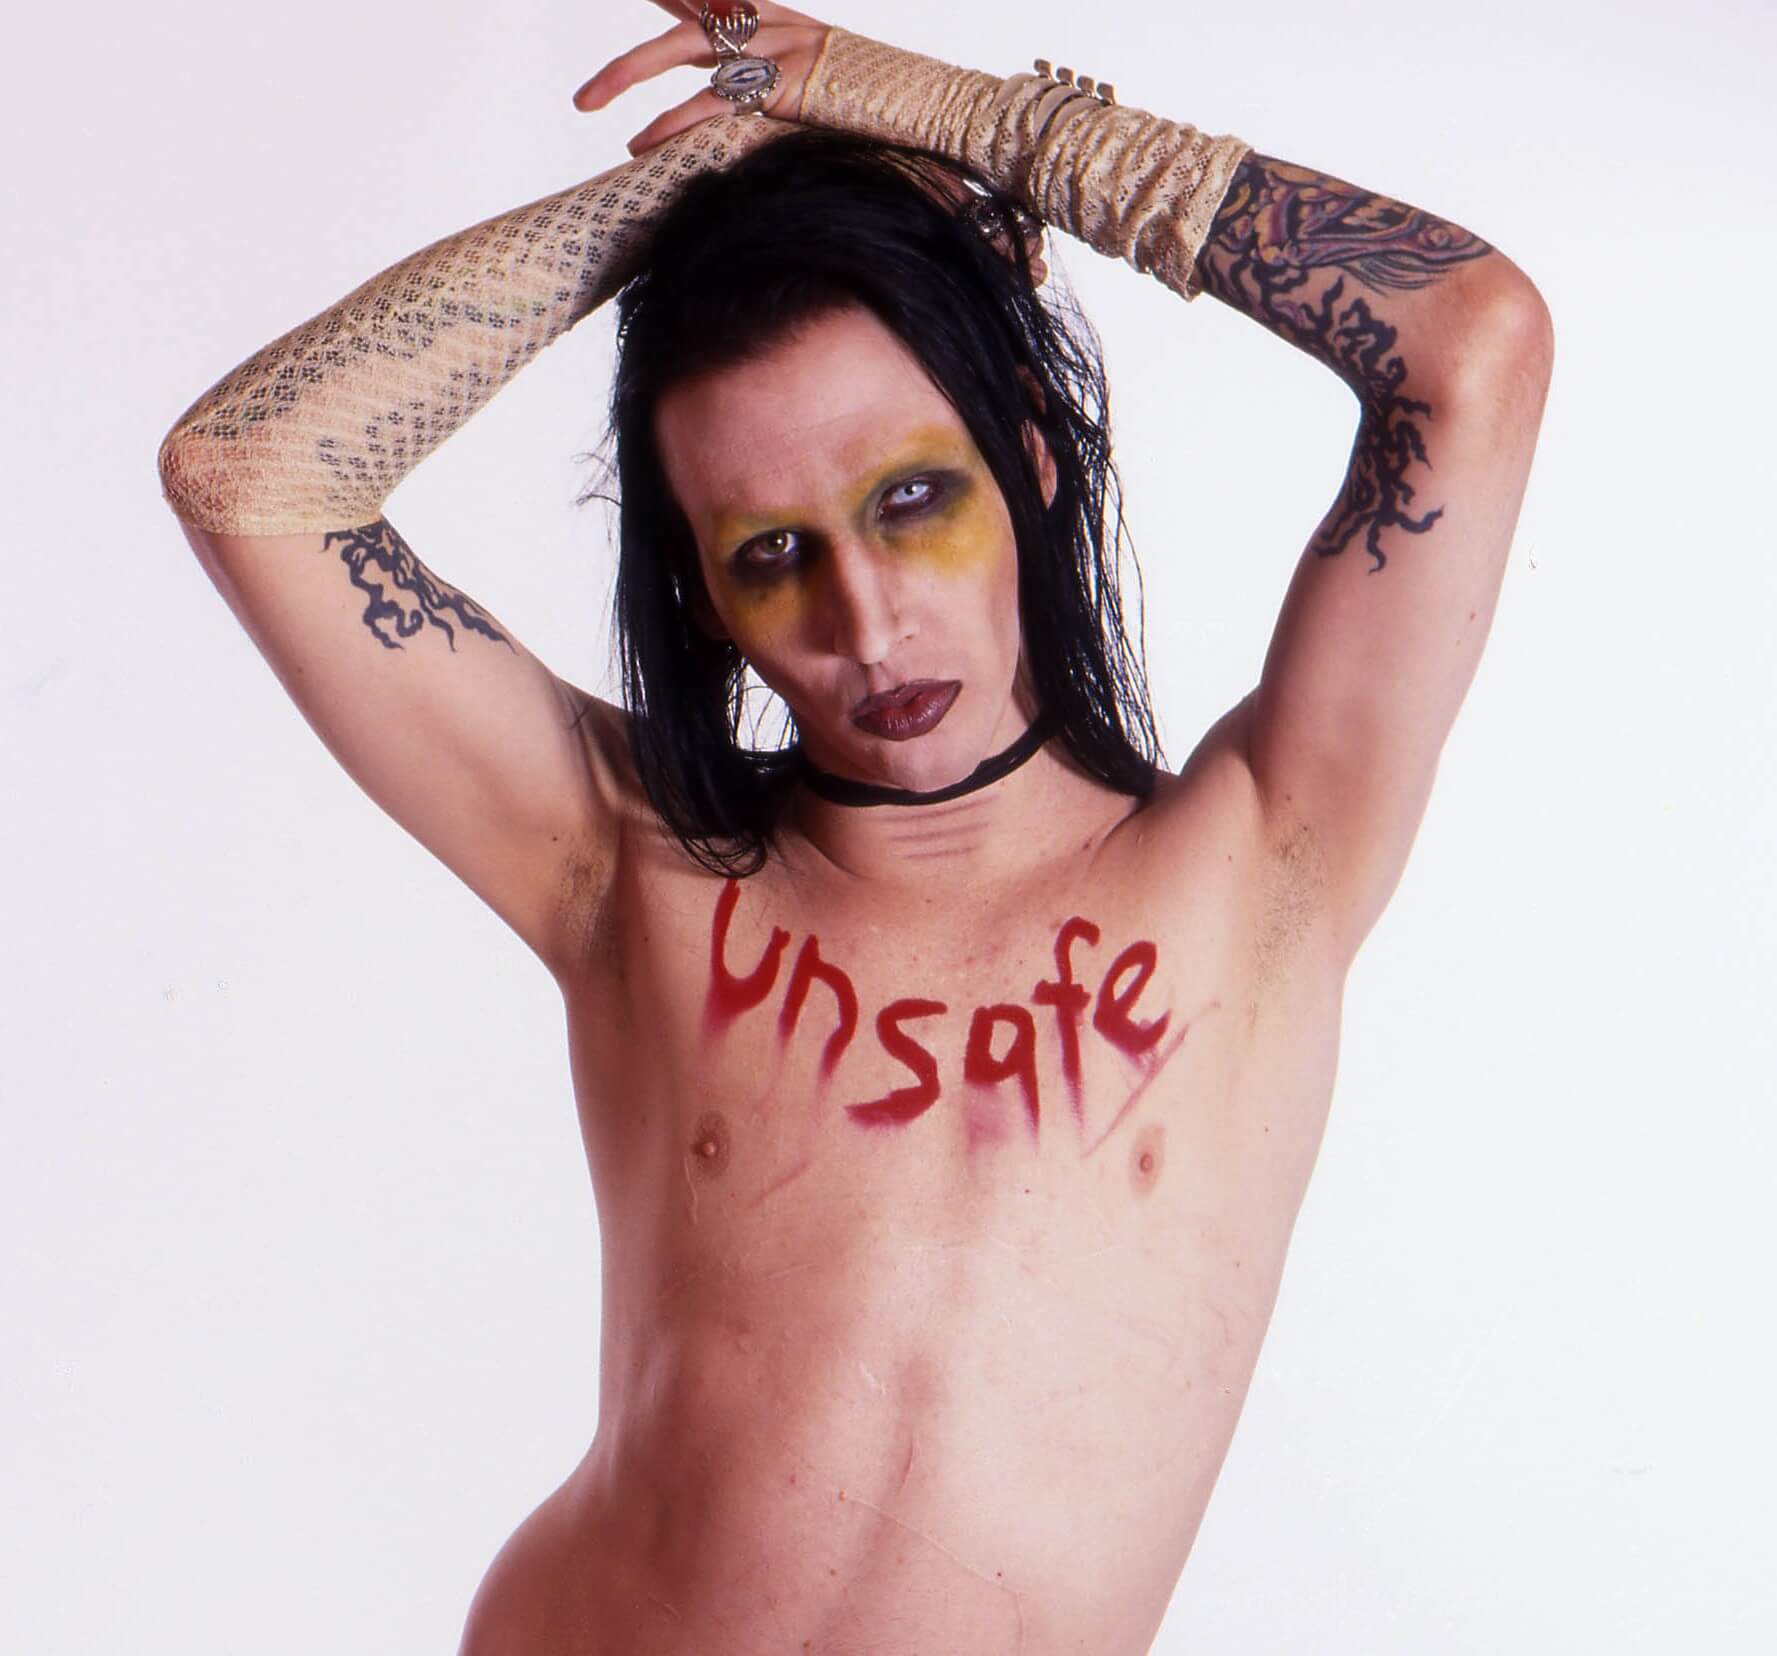 Marilyn Manson with his hands above his head